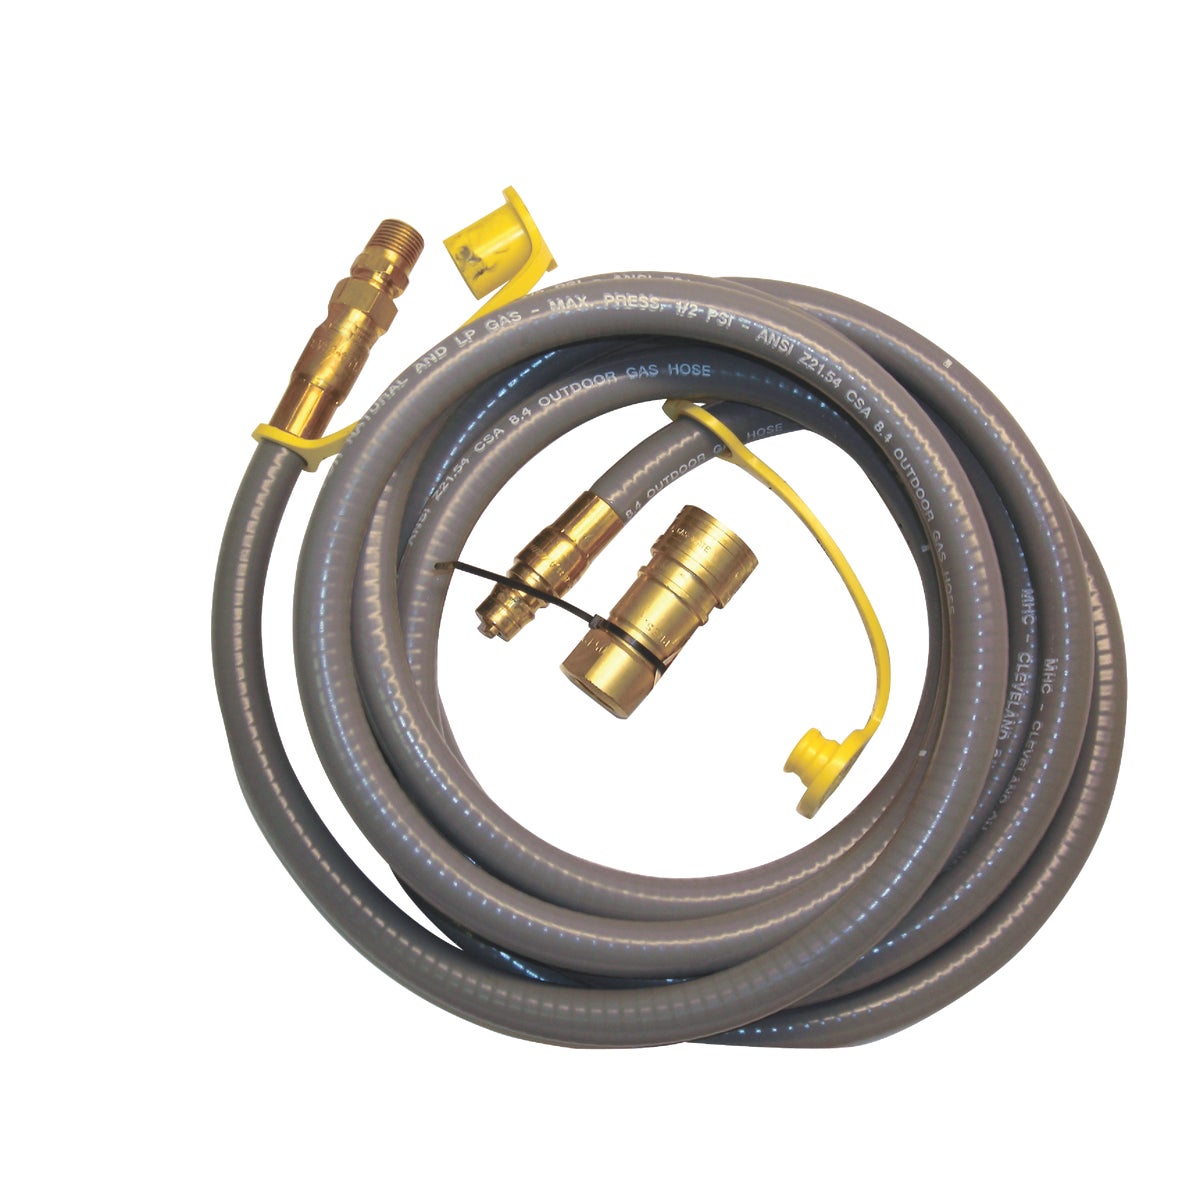 Item 451086, Hose is 1/8 In. I.D., 12 Ft. long with 3/8 In.